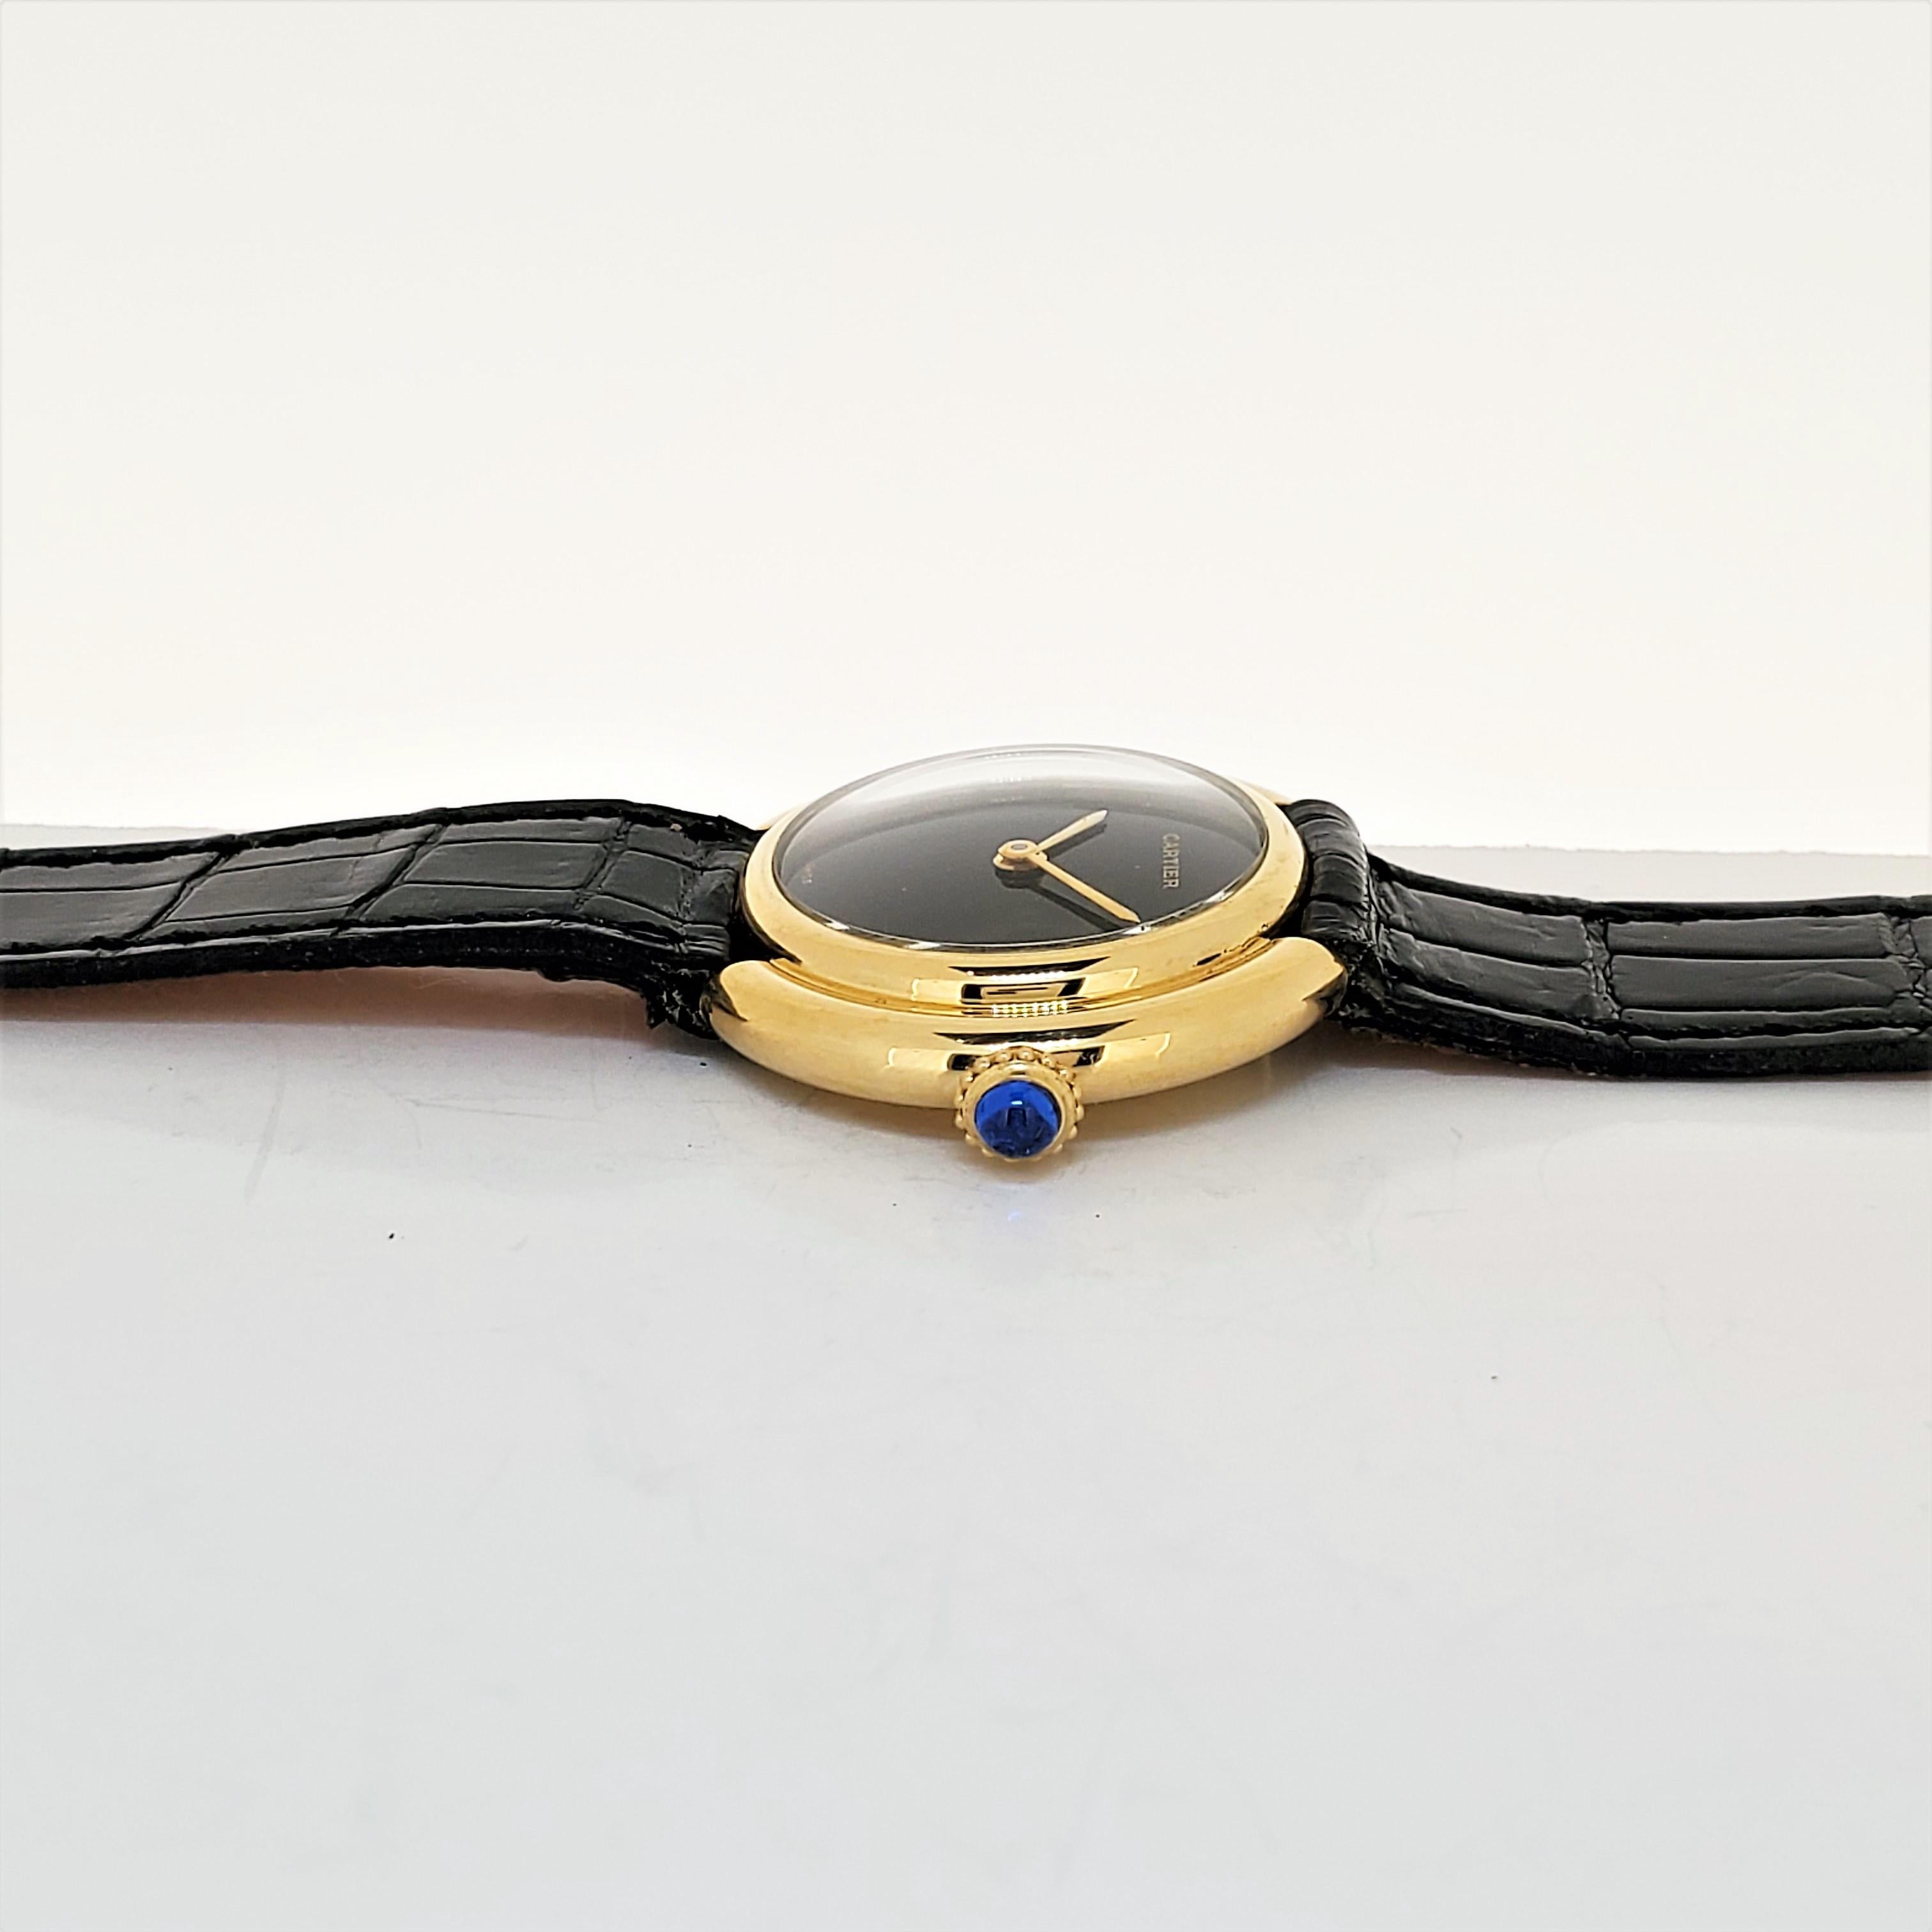 Vintage Cartier Paris Vendome Small Watch manual wind. Choice of Black or Roman  For Sale 2